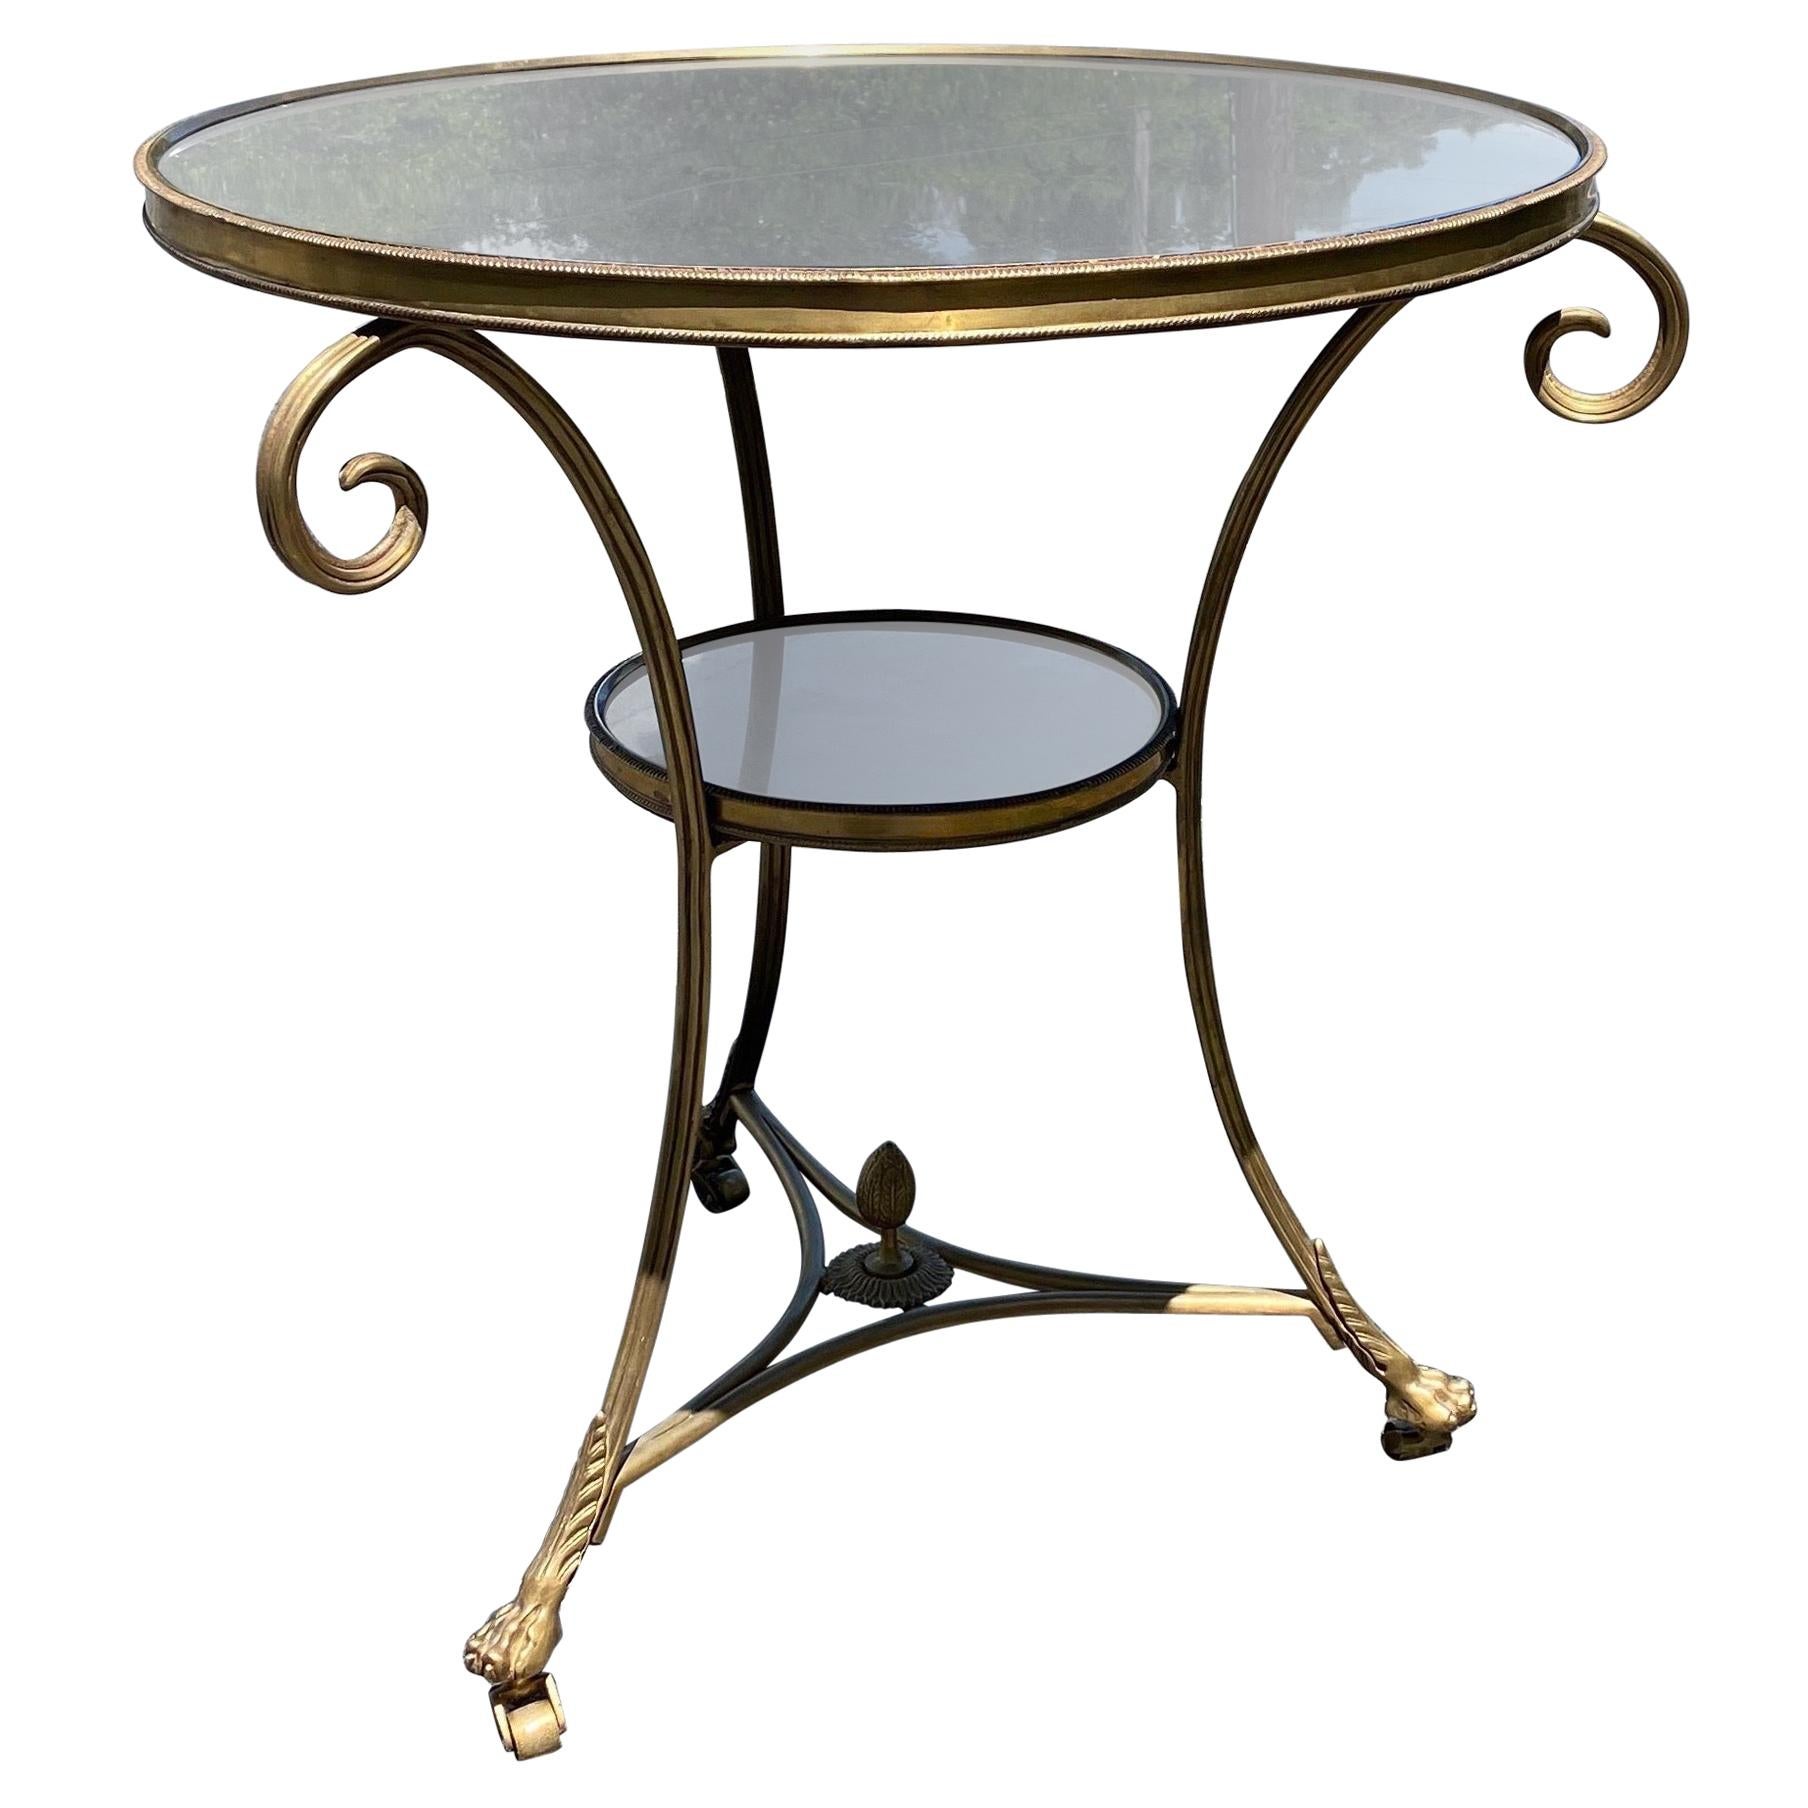 Late 19th-Early 20th Century Directoire Style Bronze Gueridon